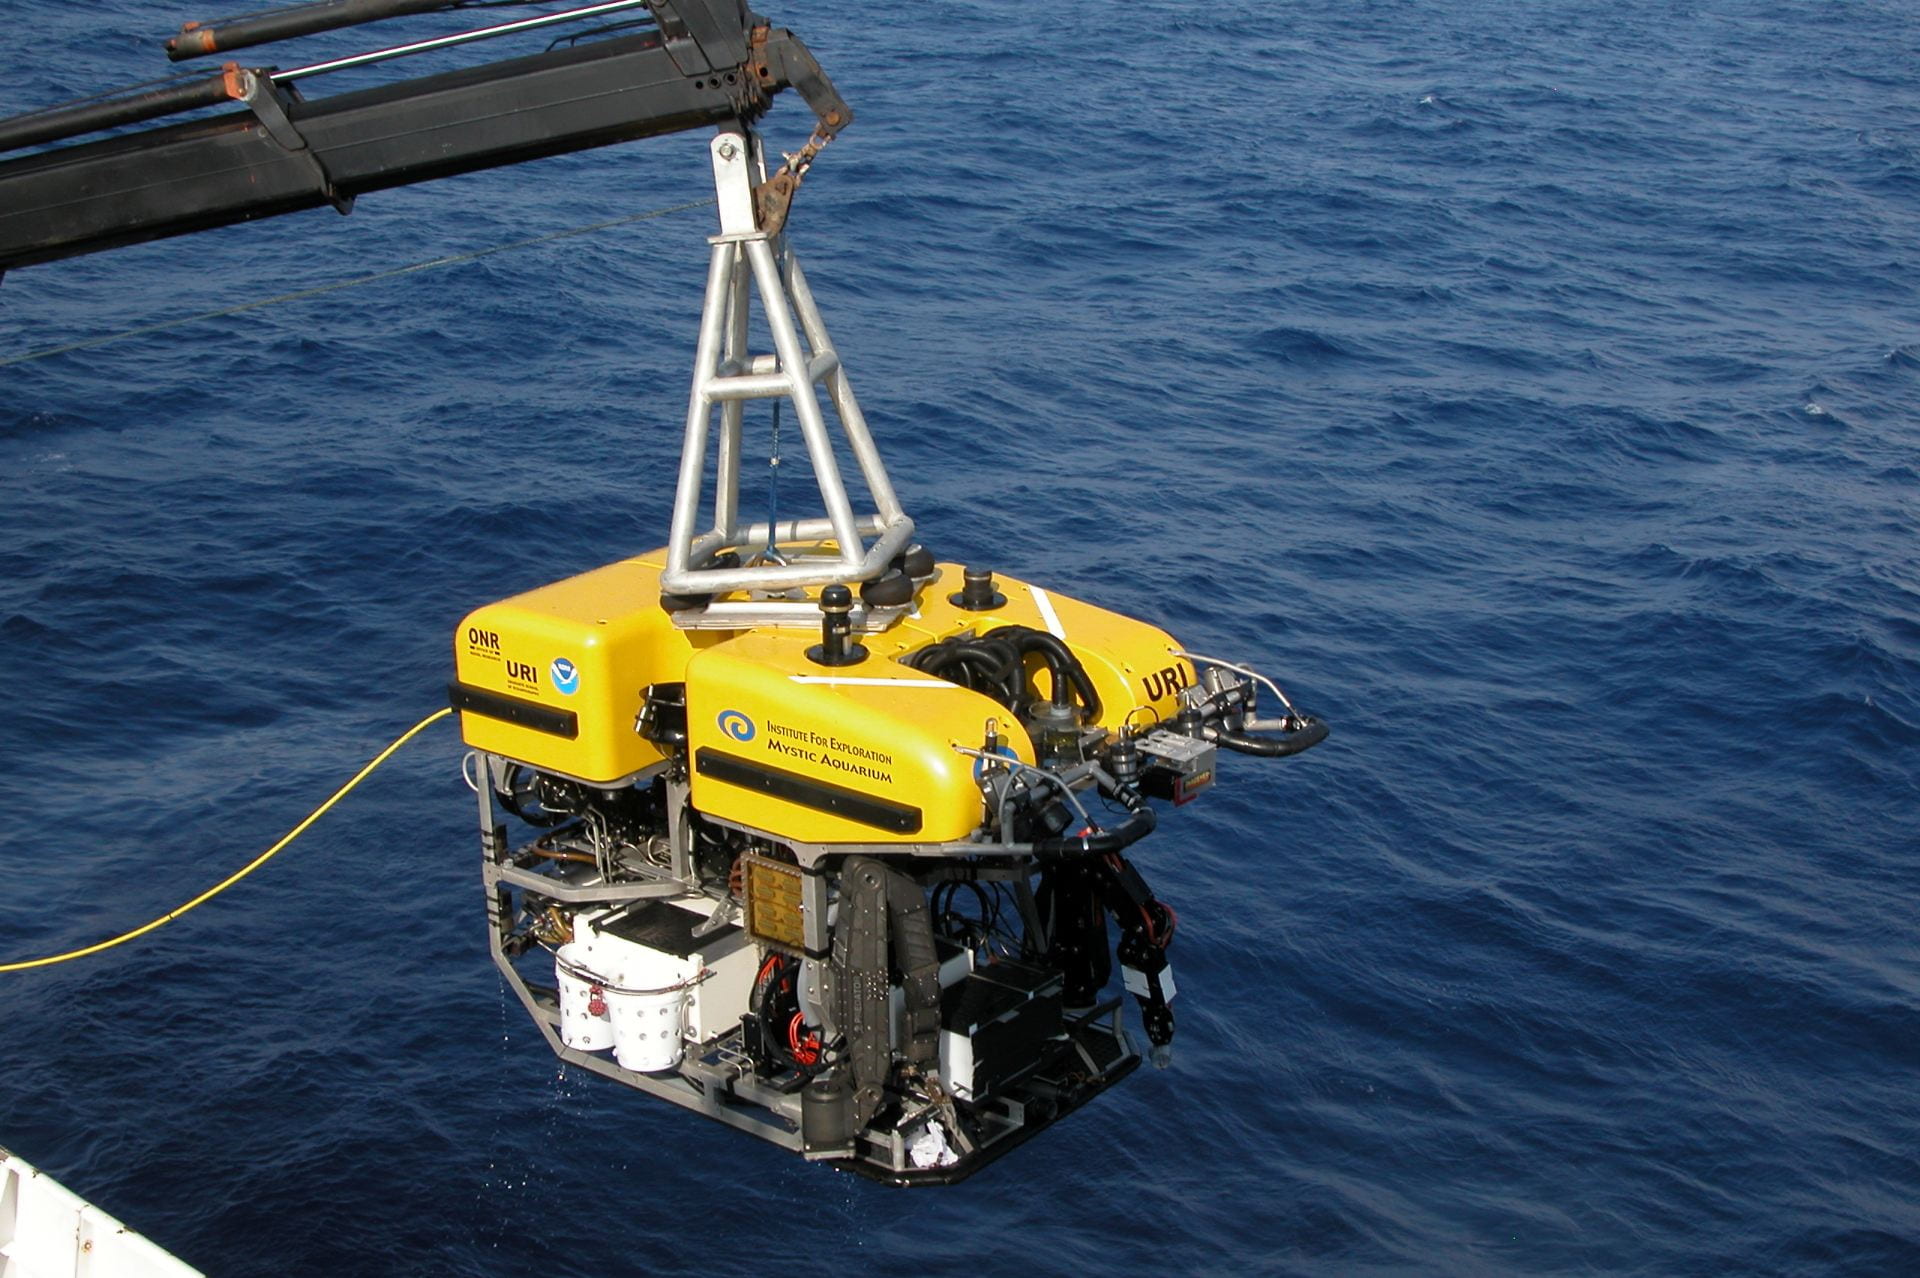 A yellow submersible ROV camera is lowered into the ocean by a winch